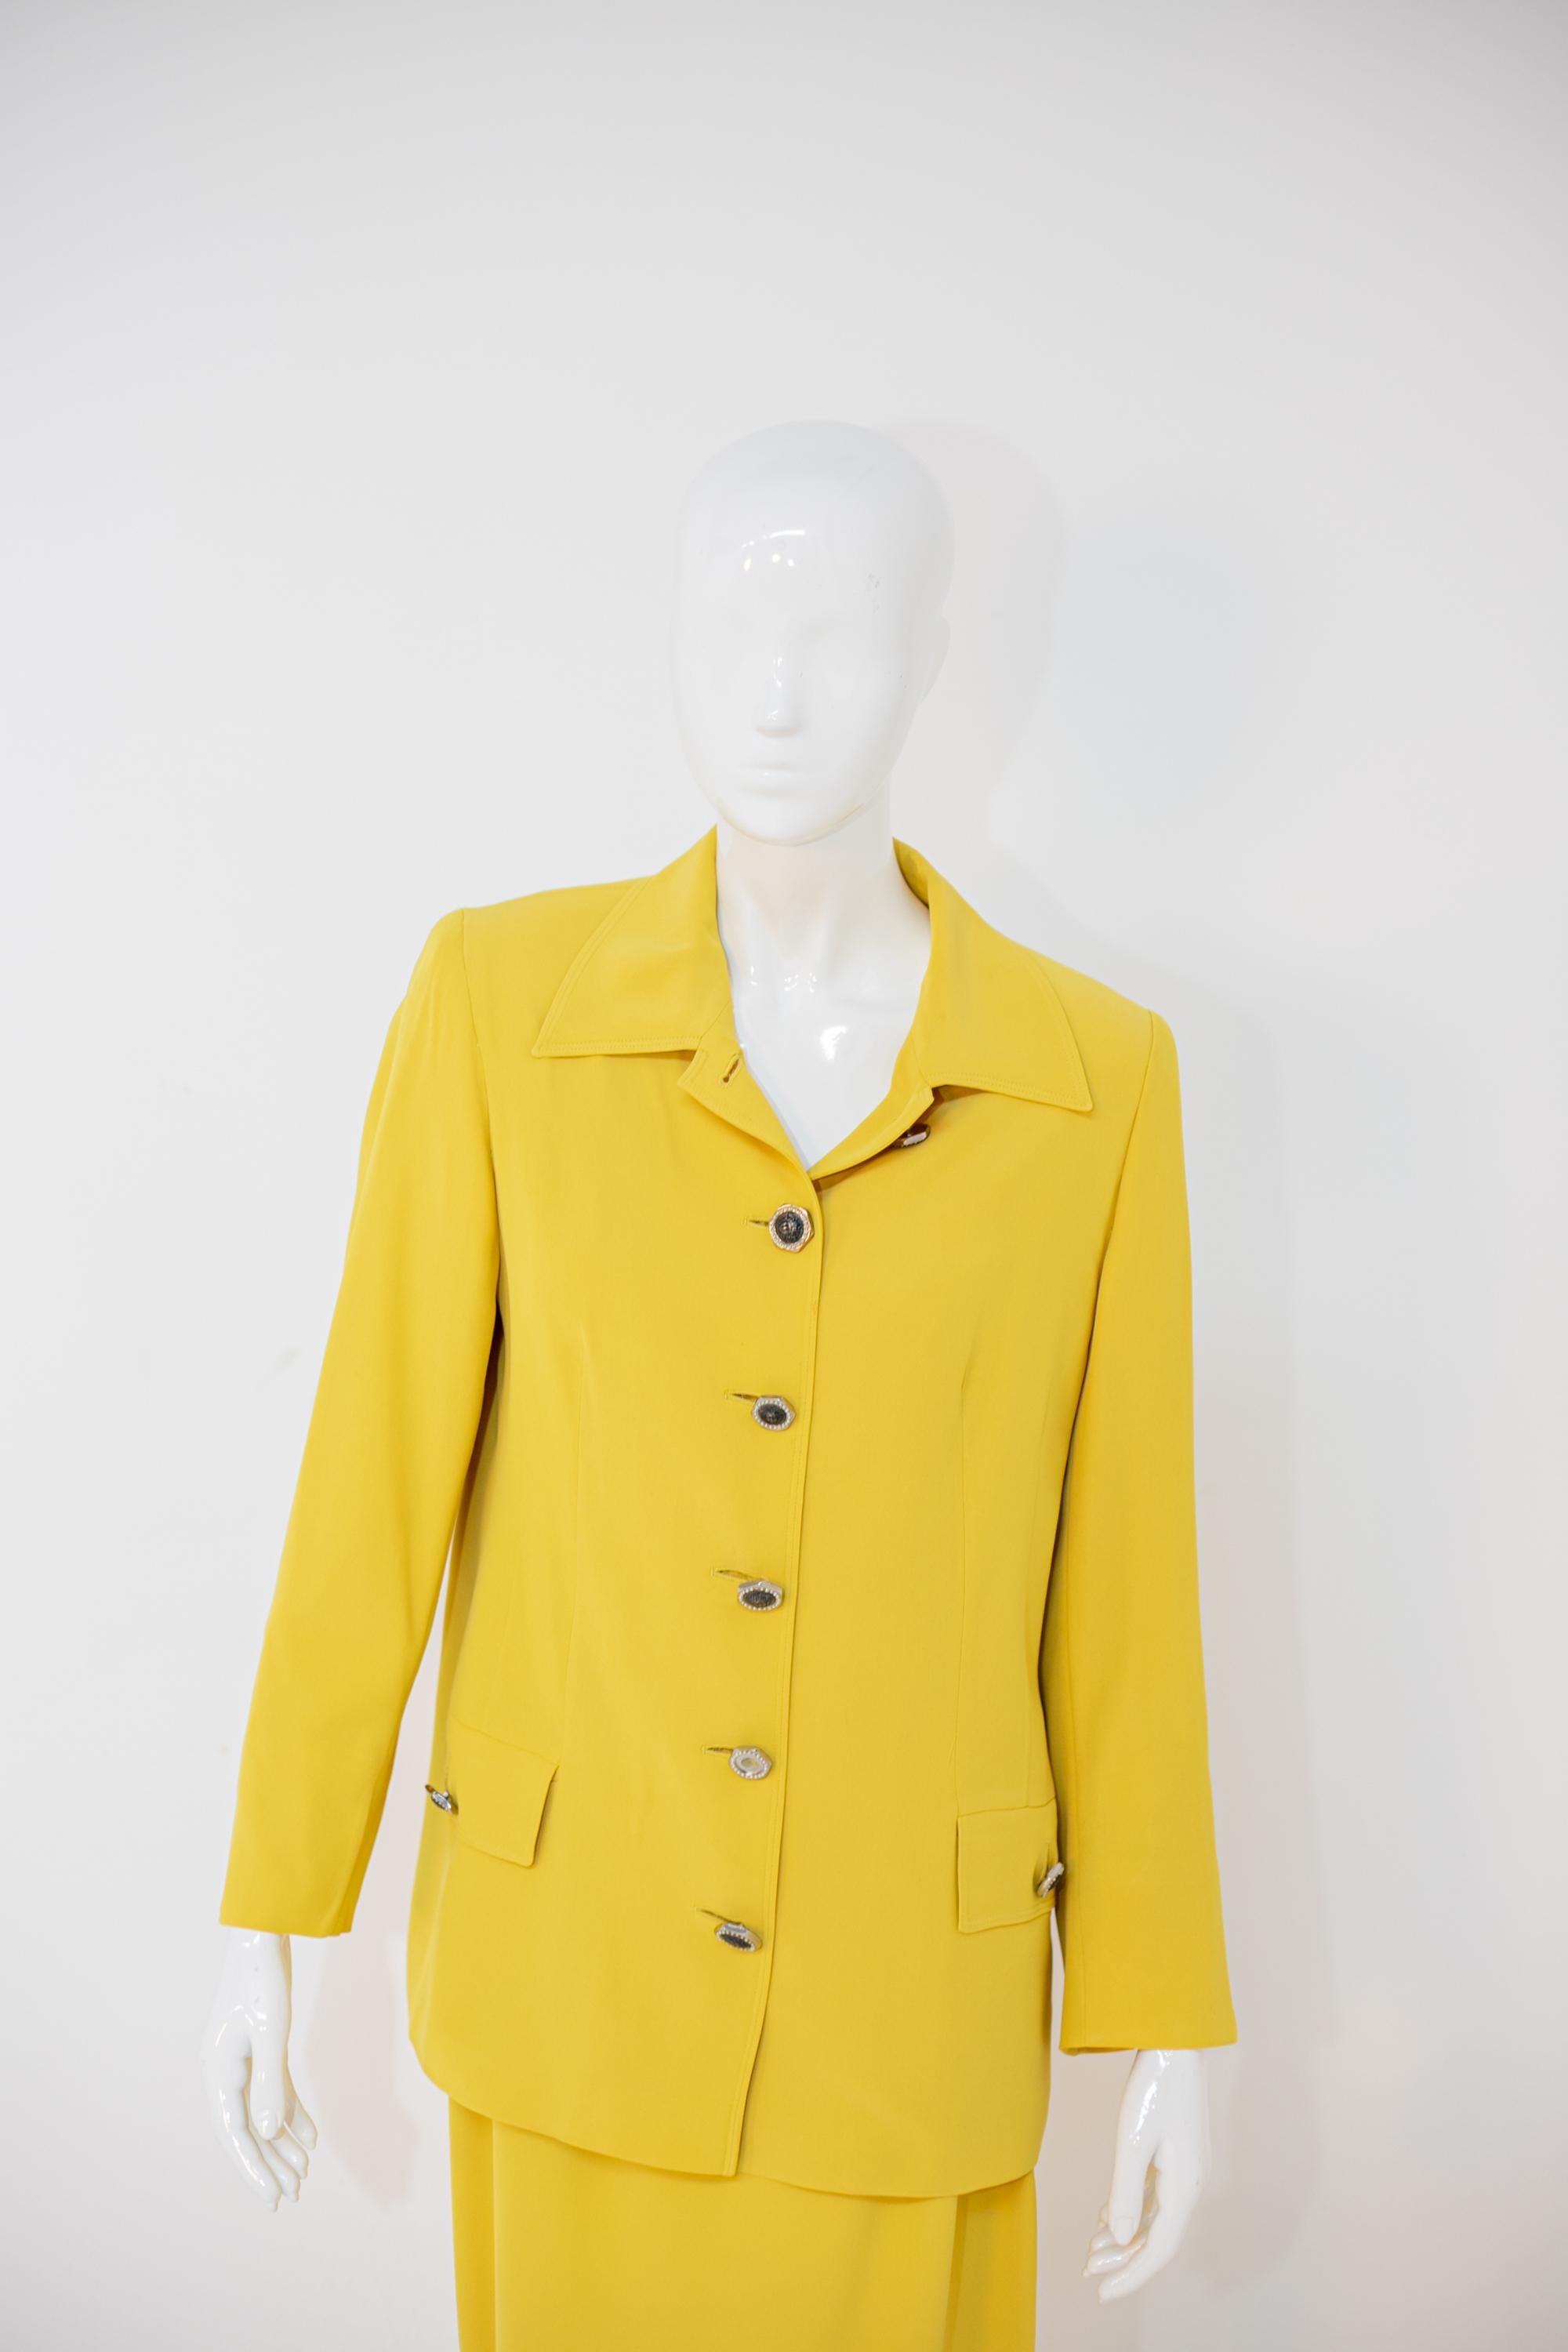 Bright Gianni Versace Yellow Two Piece Formal Suit For Sale 1